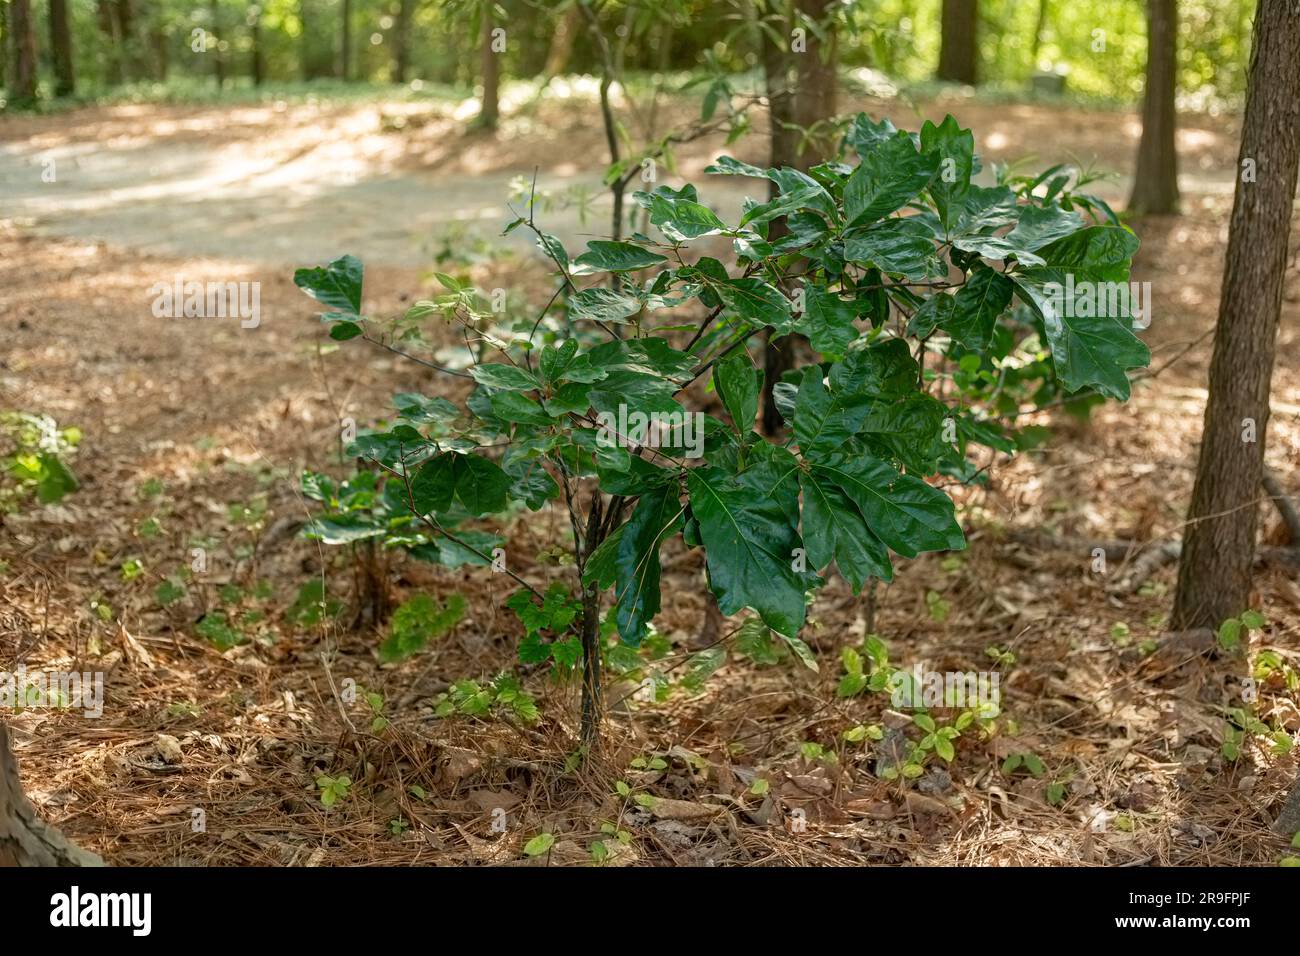 A young Blackjack Oak tree (Quercus marilandica) sprouts upward in the North Carolina forest understory. Stock Photo